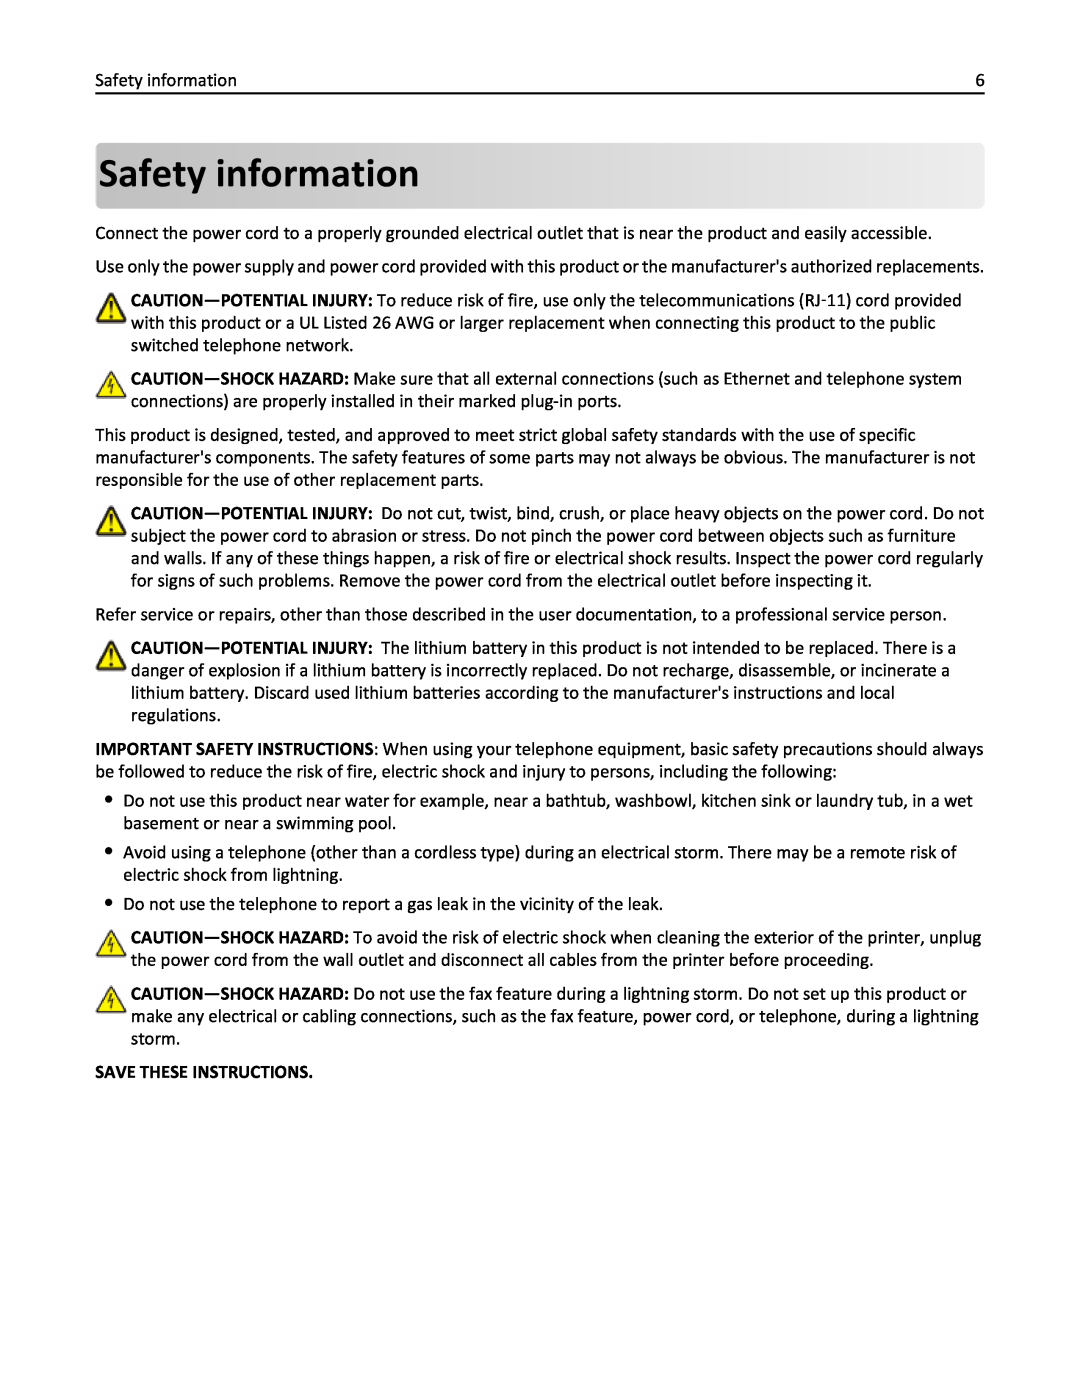 Lexmark 20E, 200 manual Safety information, Save These Instructions 